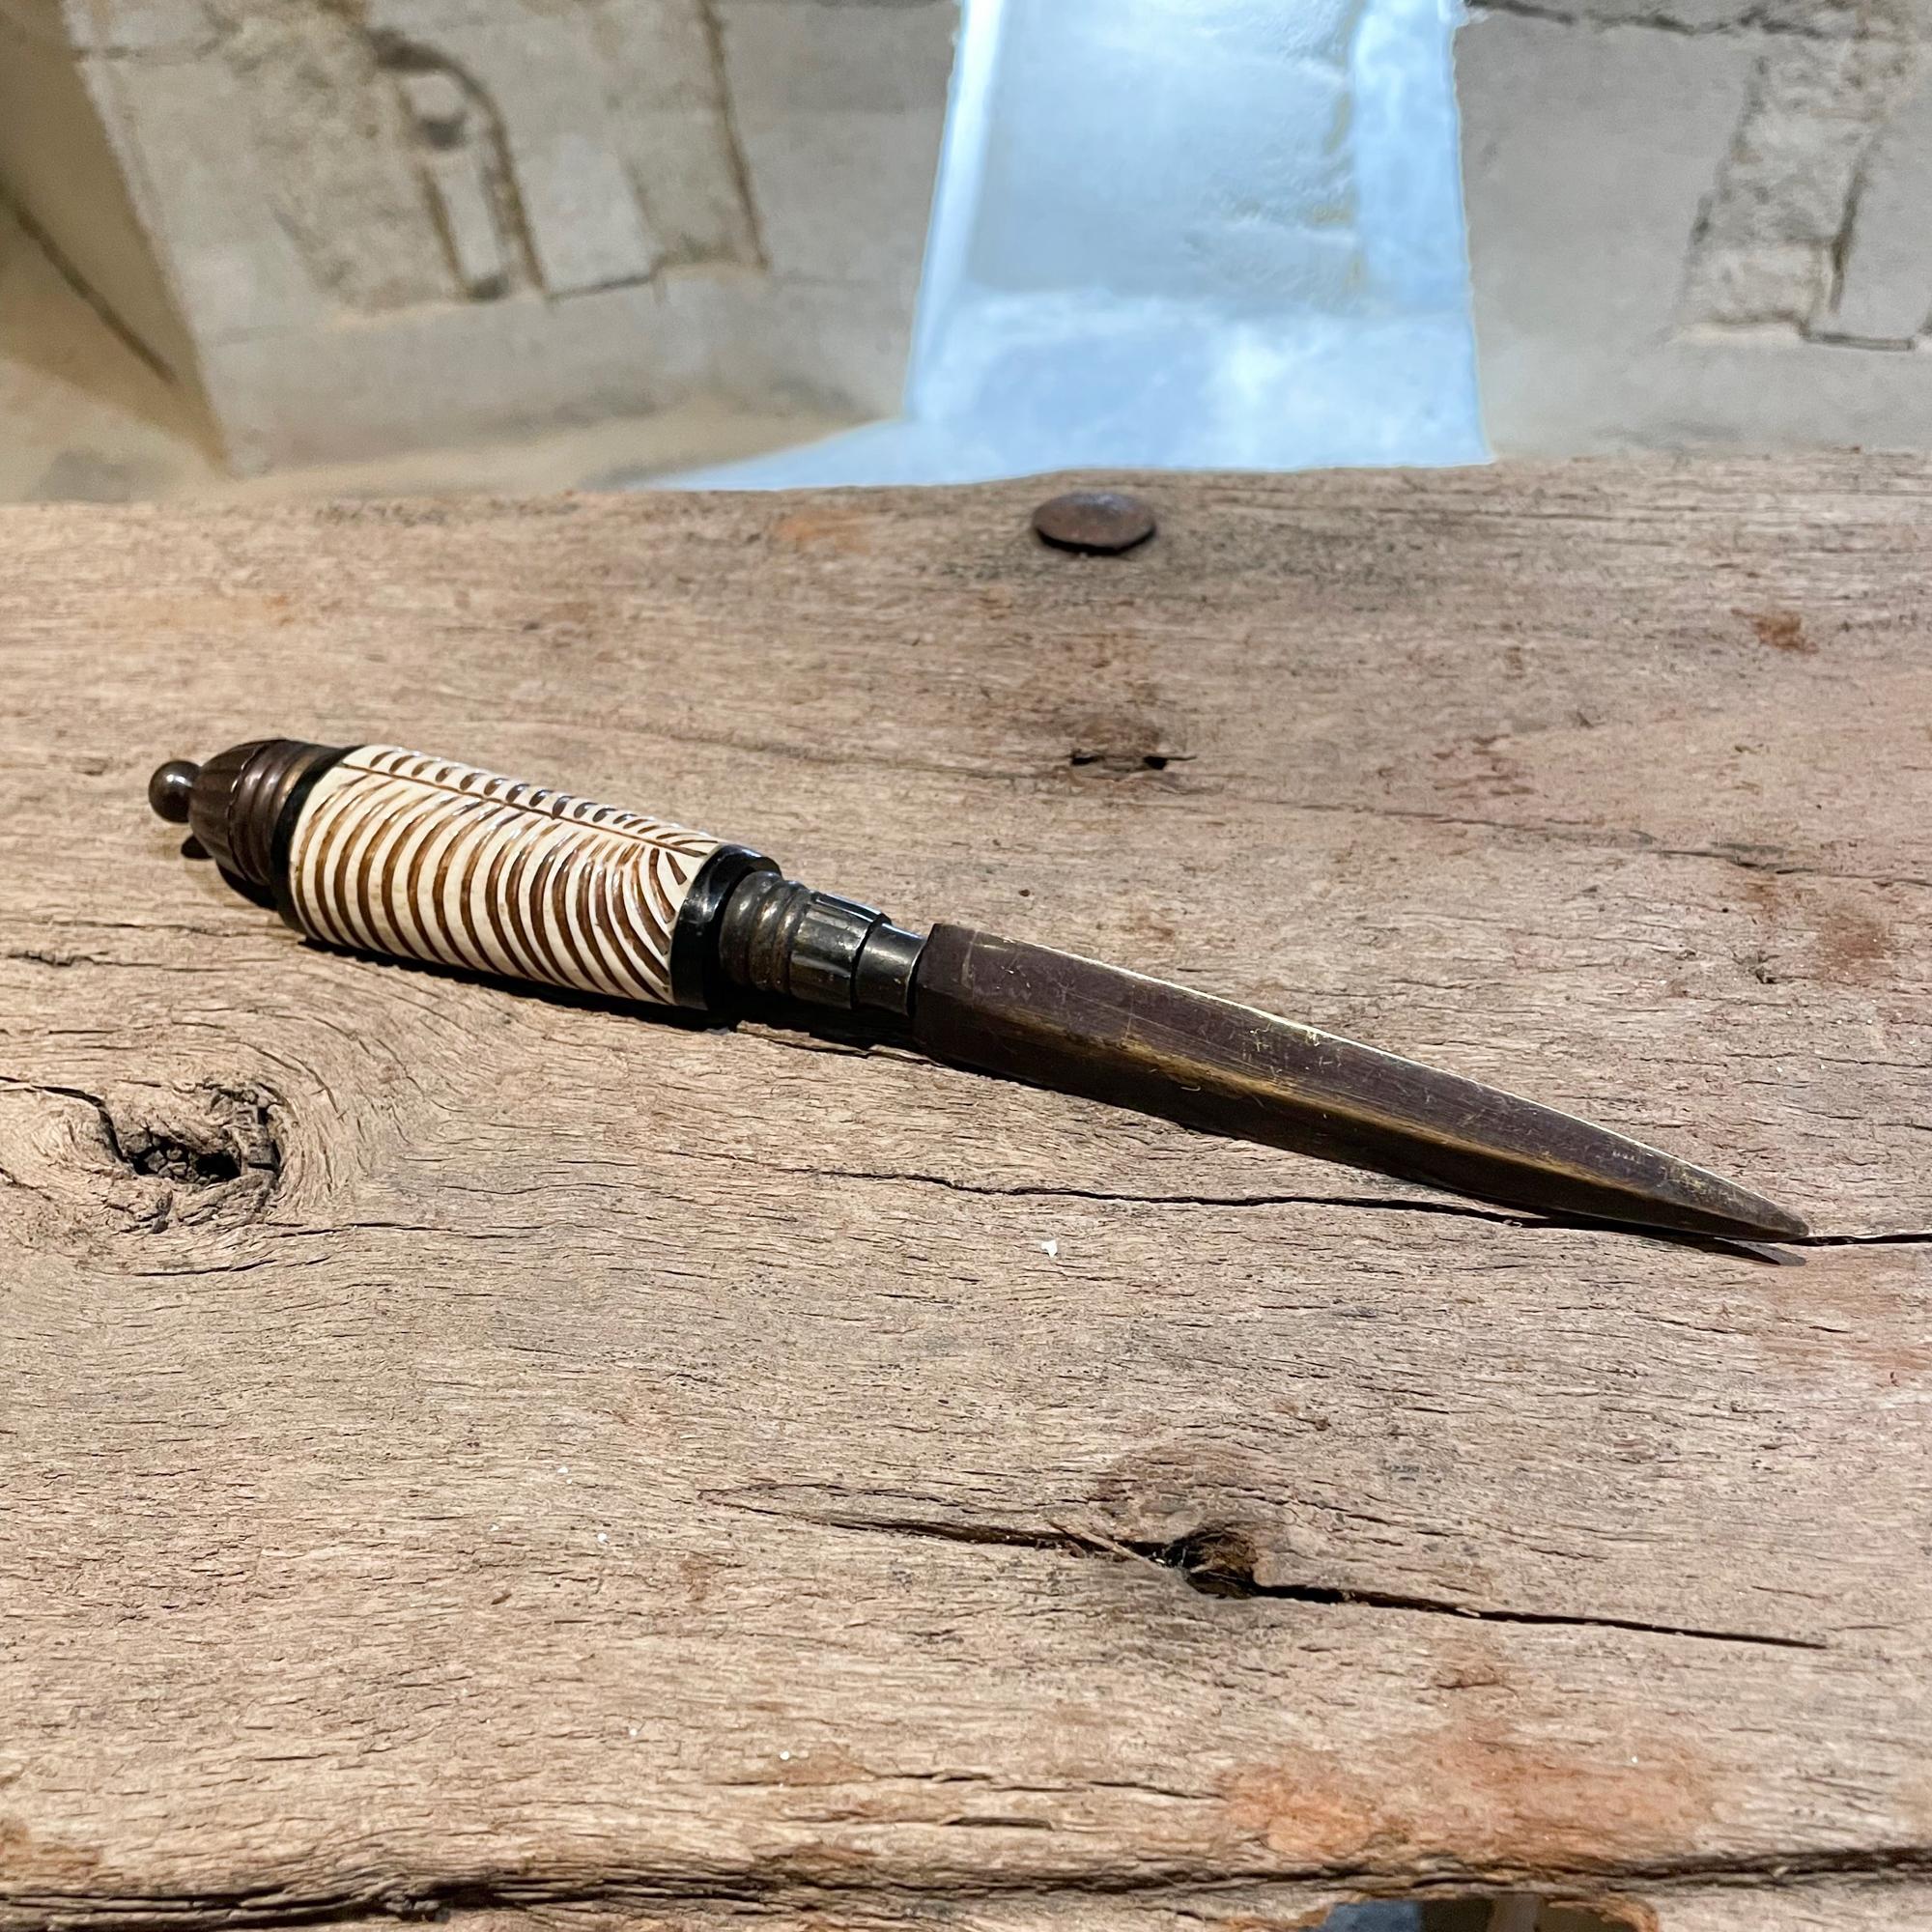 1980s stylish dagger in bone and bronze vintage letter opener with African motif
Measures: 9.25 L x 1.38 x 1 inches
Unrestored vintage condition original presentation.
Please see images.
  